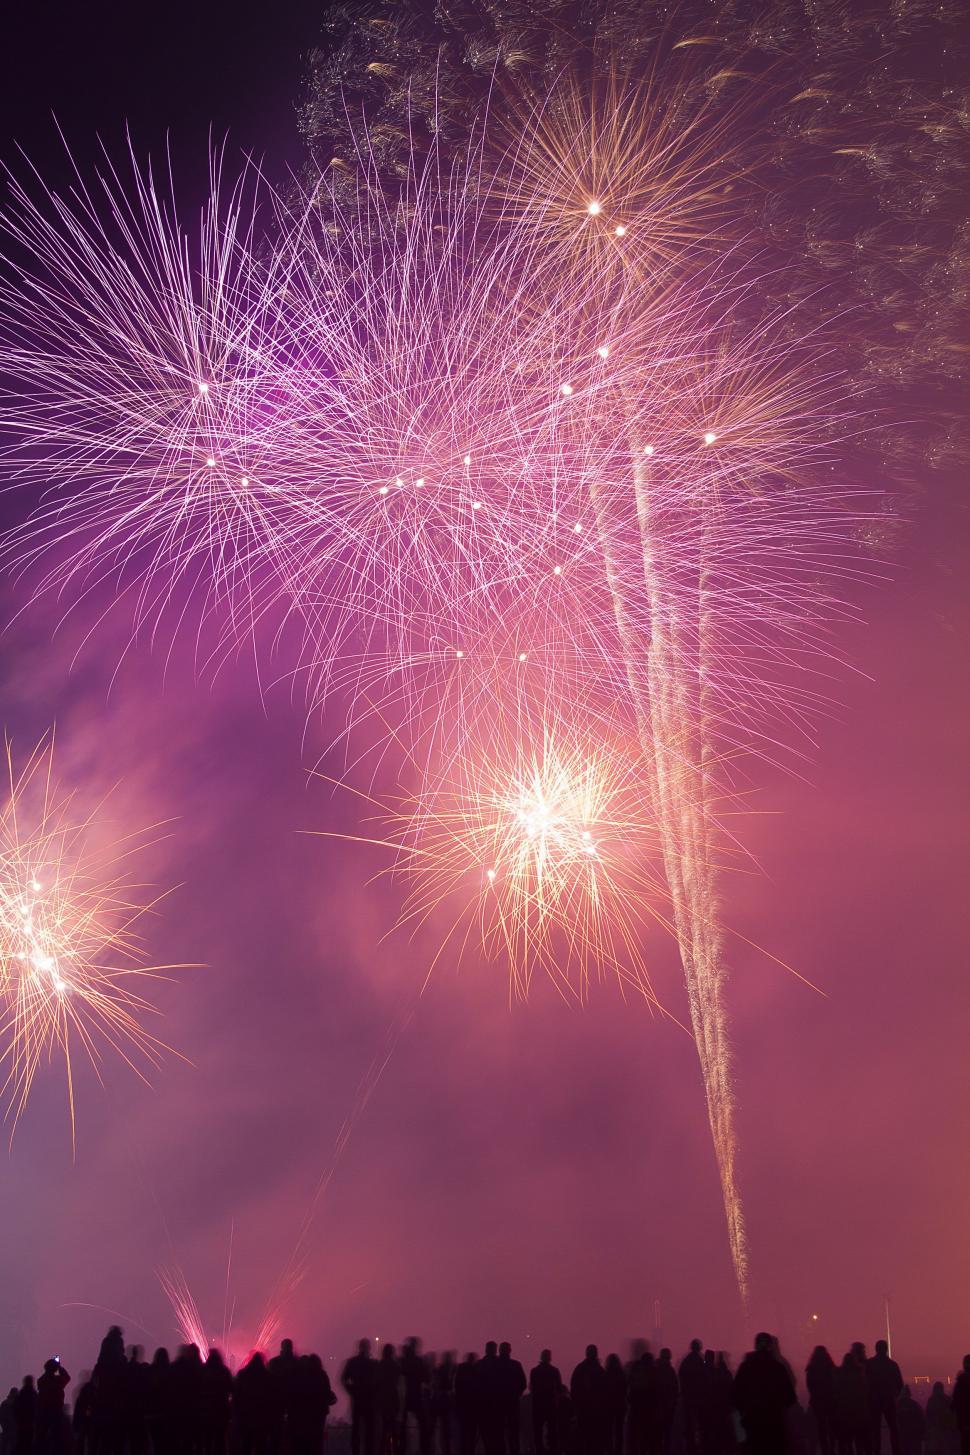 Free Image of New Year Celebrations with Fireworks  